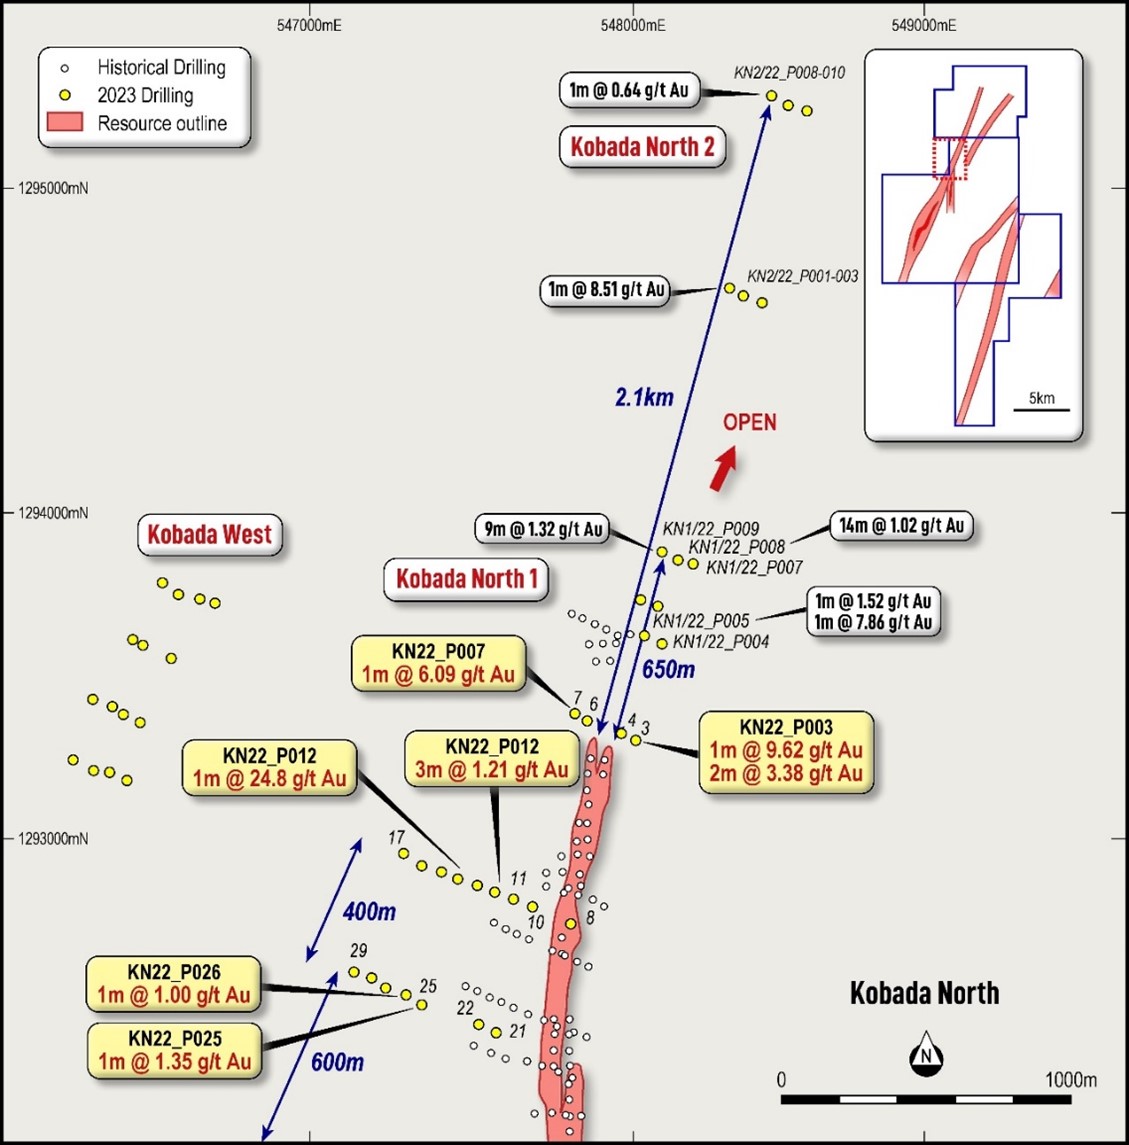 Plan showing Kobada North RC drilling locations and results